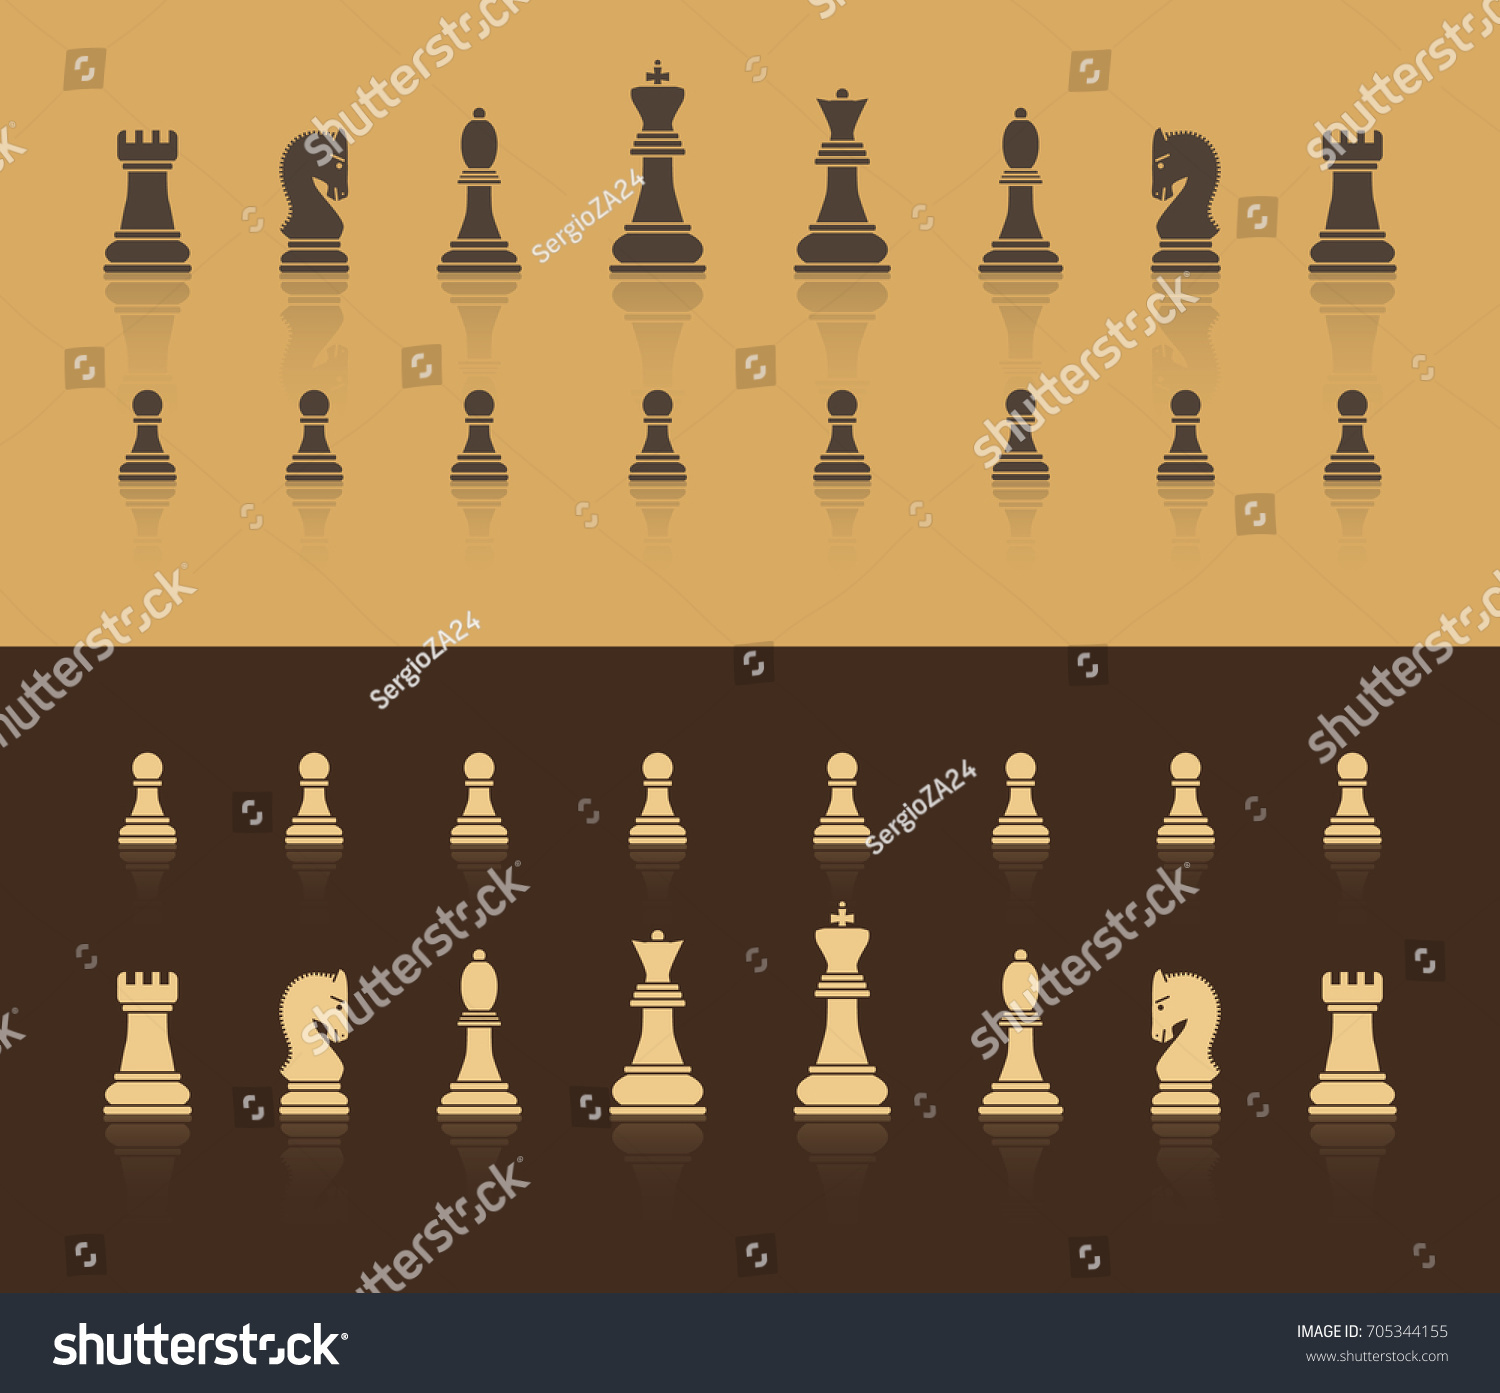 SVG of All figures are chess. In brown shades, with a shadow in the form of reflection. Flat style. Vector image. svg